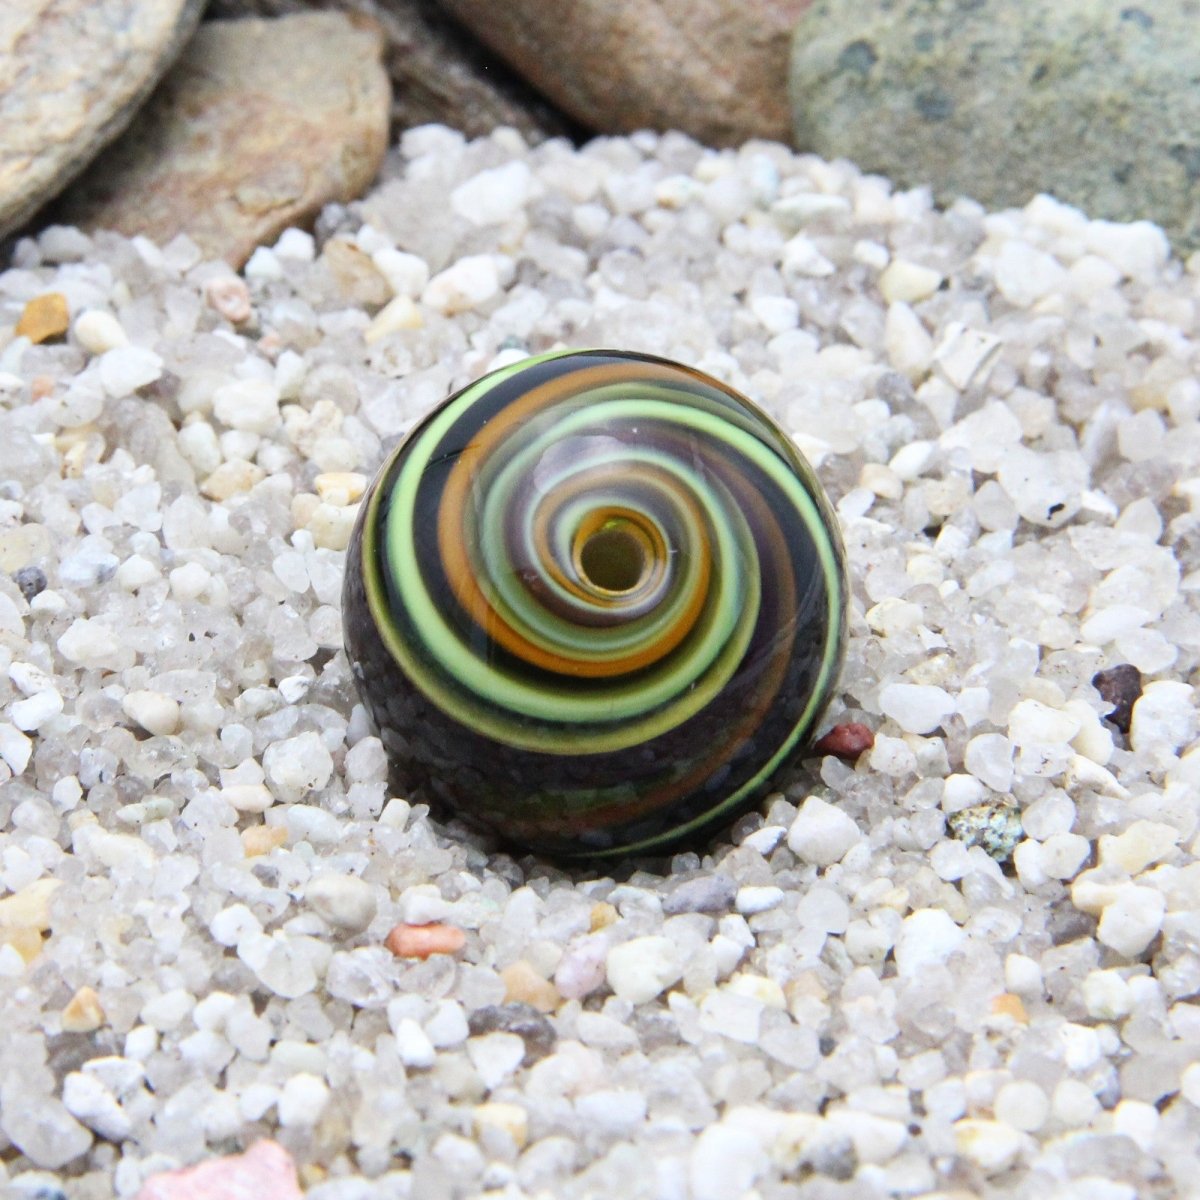 Green and Red Striped Statement Bead - Handmade Glass Lampwork, Unique Focal Bead for Pendant, Suncatcher, or Home Decorating